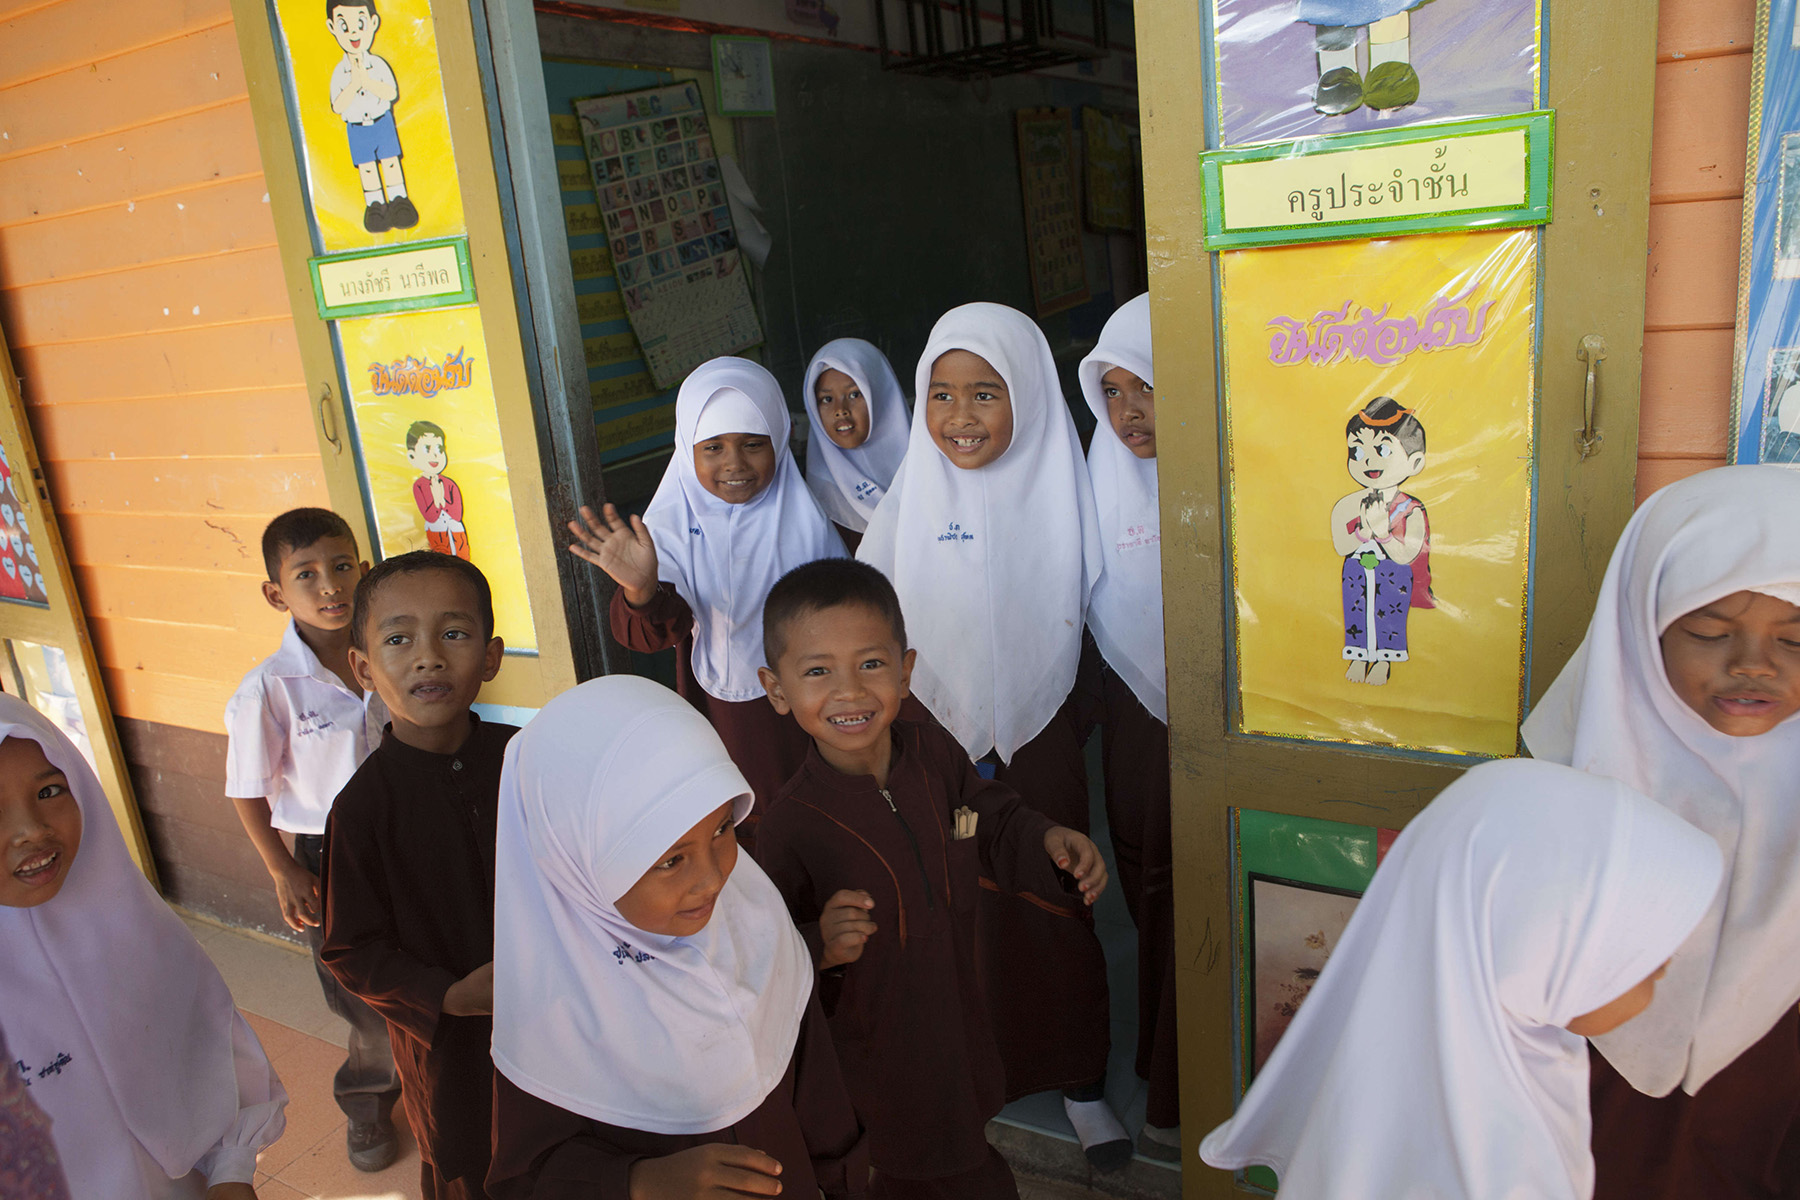 Elementary school children leaving class, some are smiling and waving at the camera.

